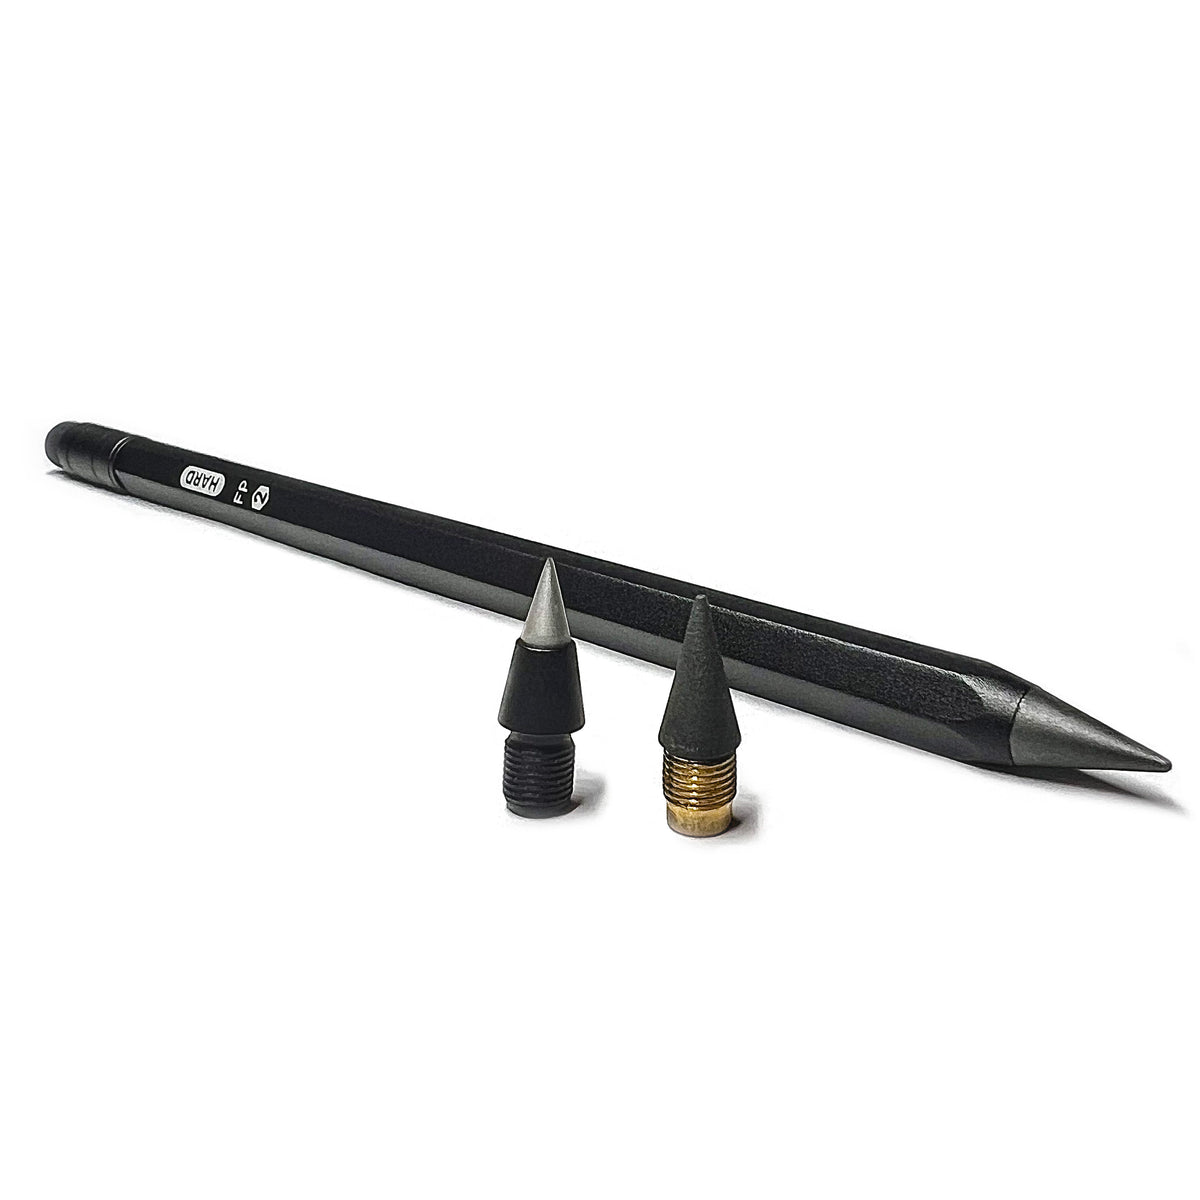 New! The FN Pen 2.0